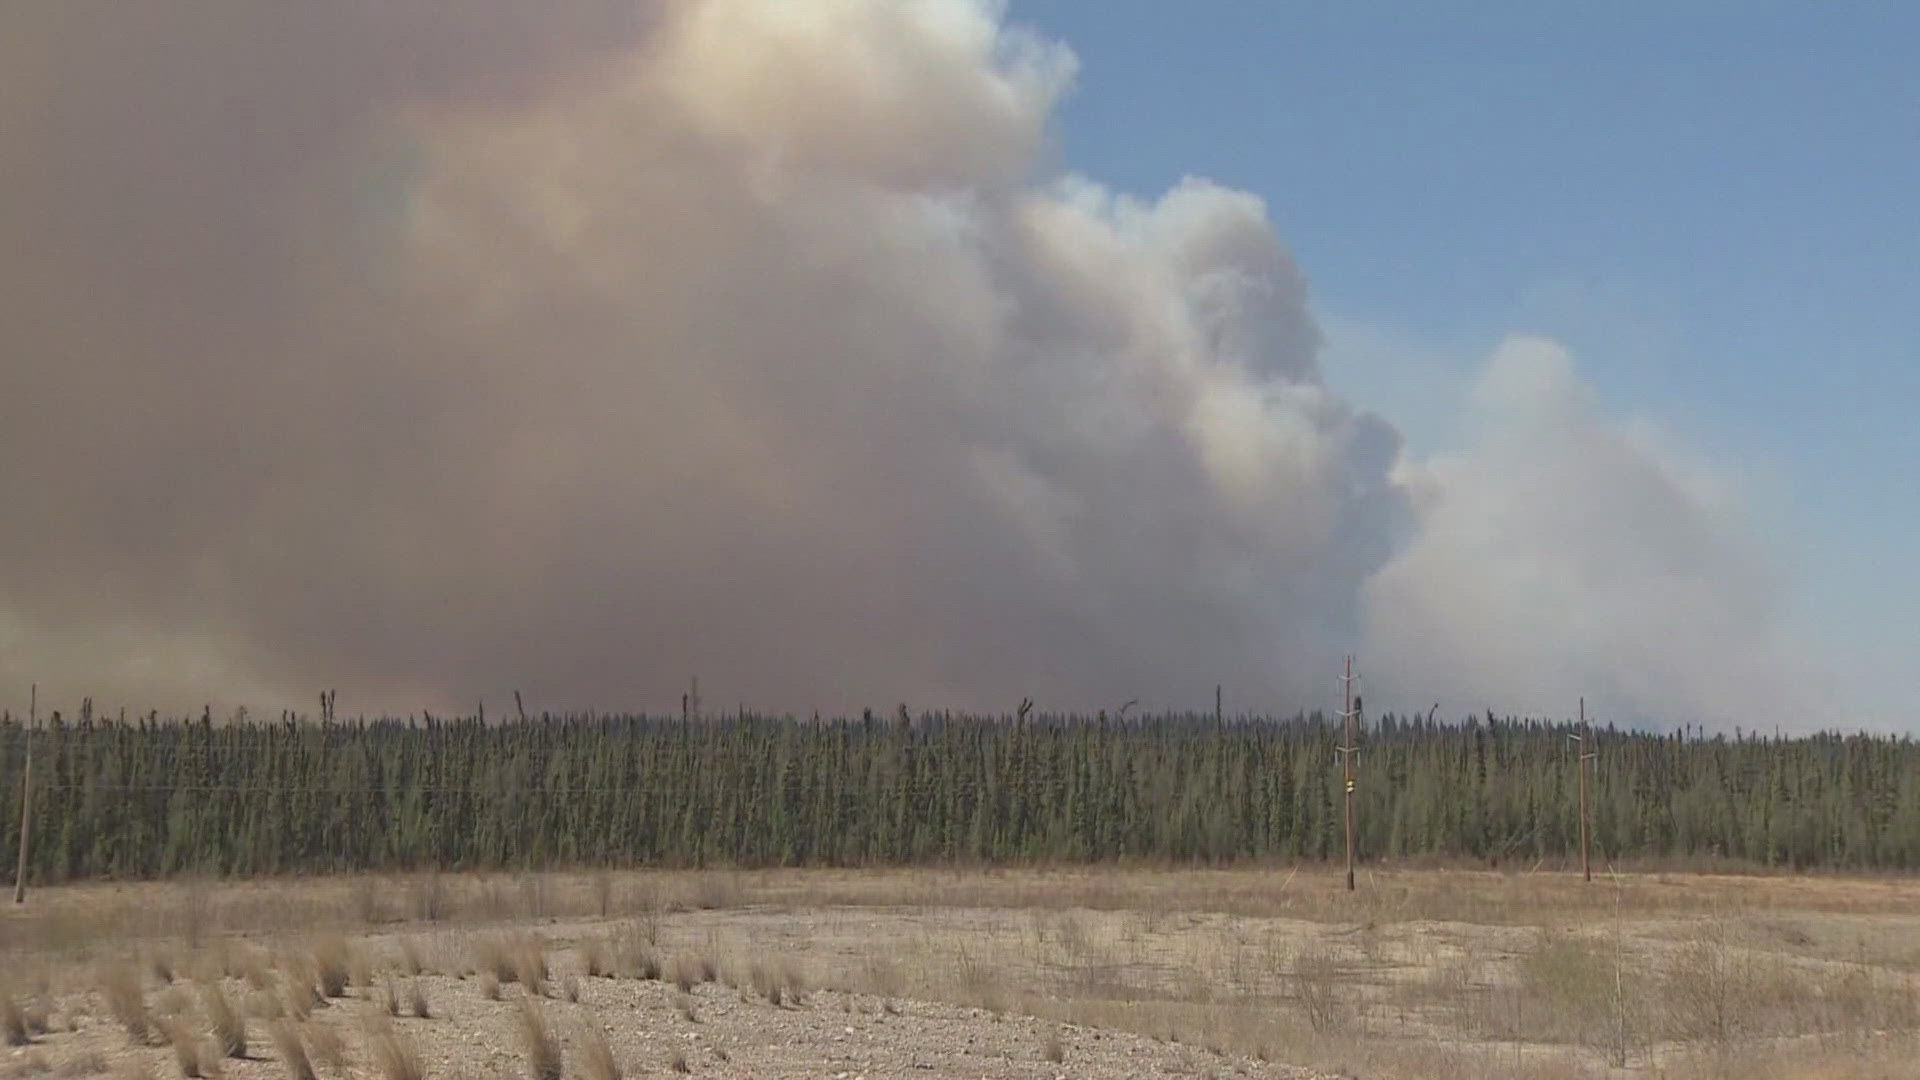 The fire has burned over 200 square miles northwest of Fort Nelson.  3,000 people in the surrounding area have been evacuated.